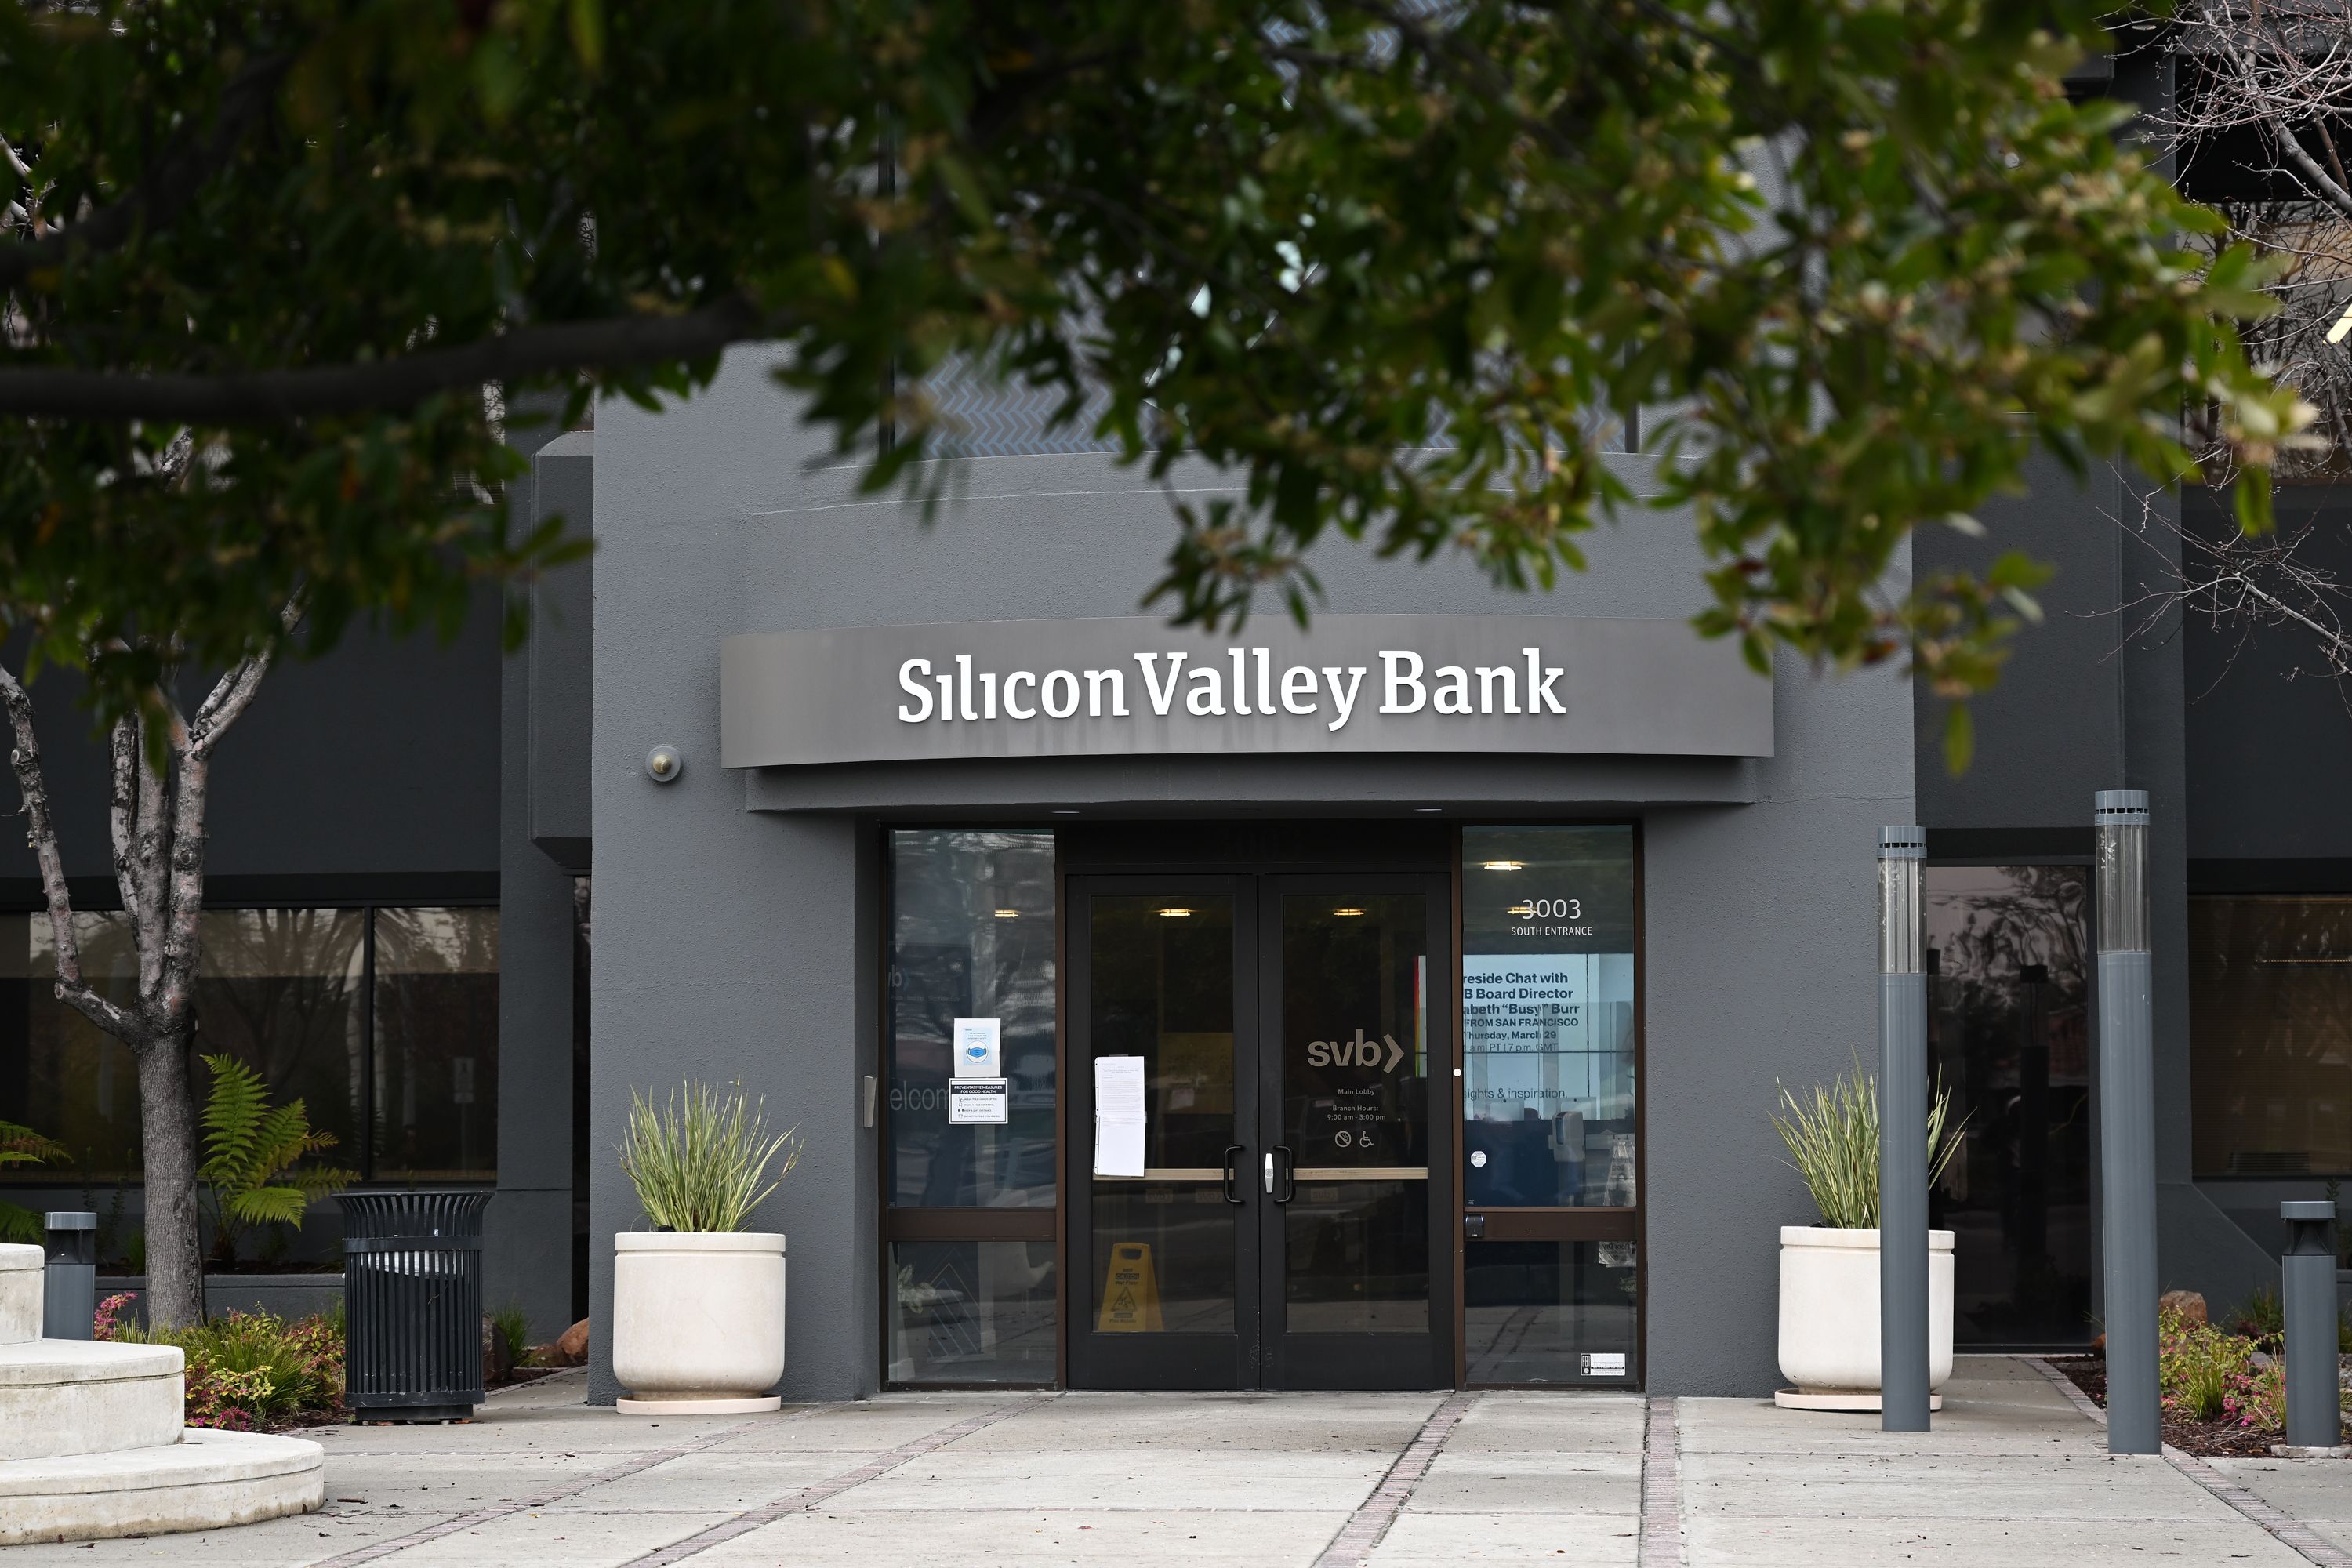 Watch: Massive line forms outside Silicon Valley Bank as customers